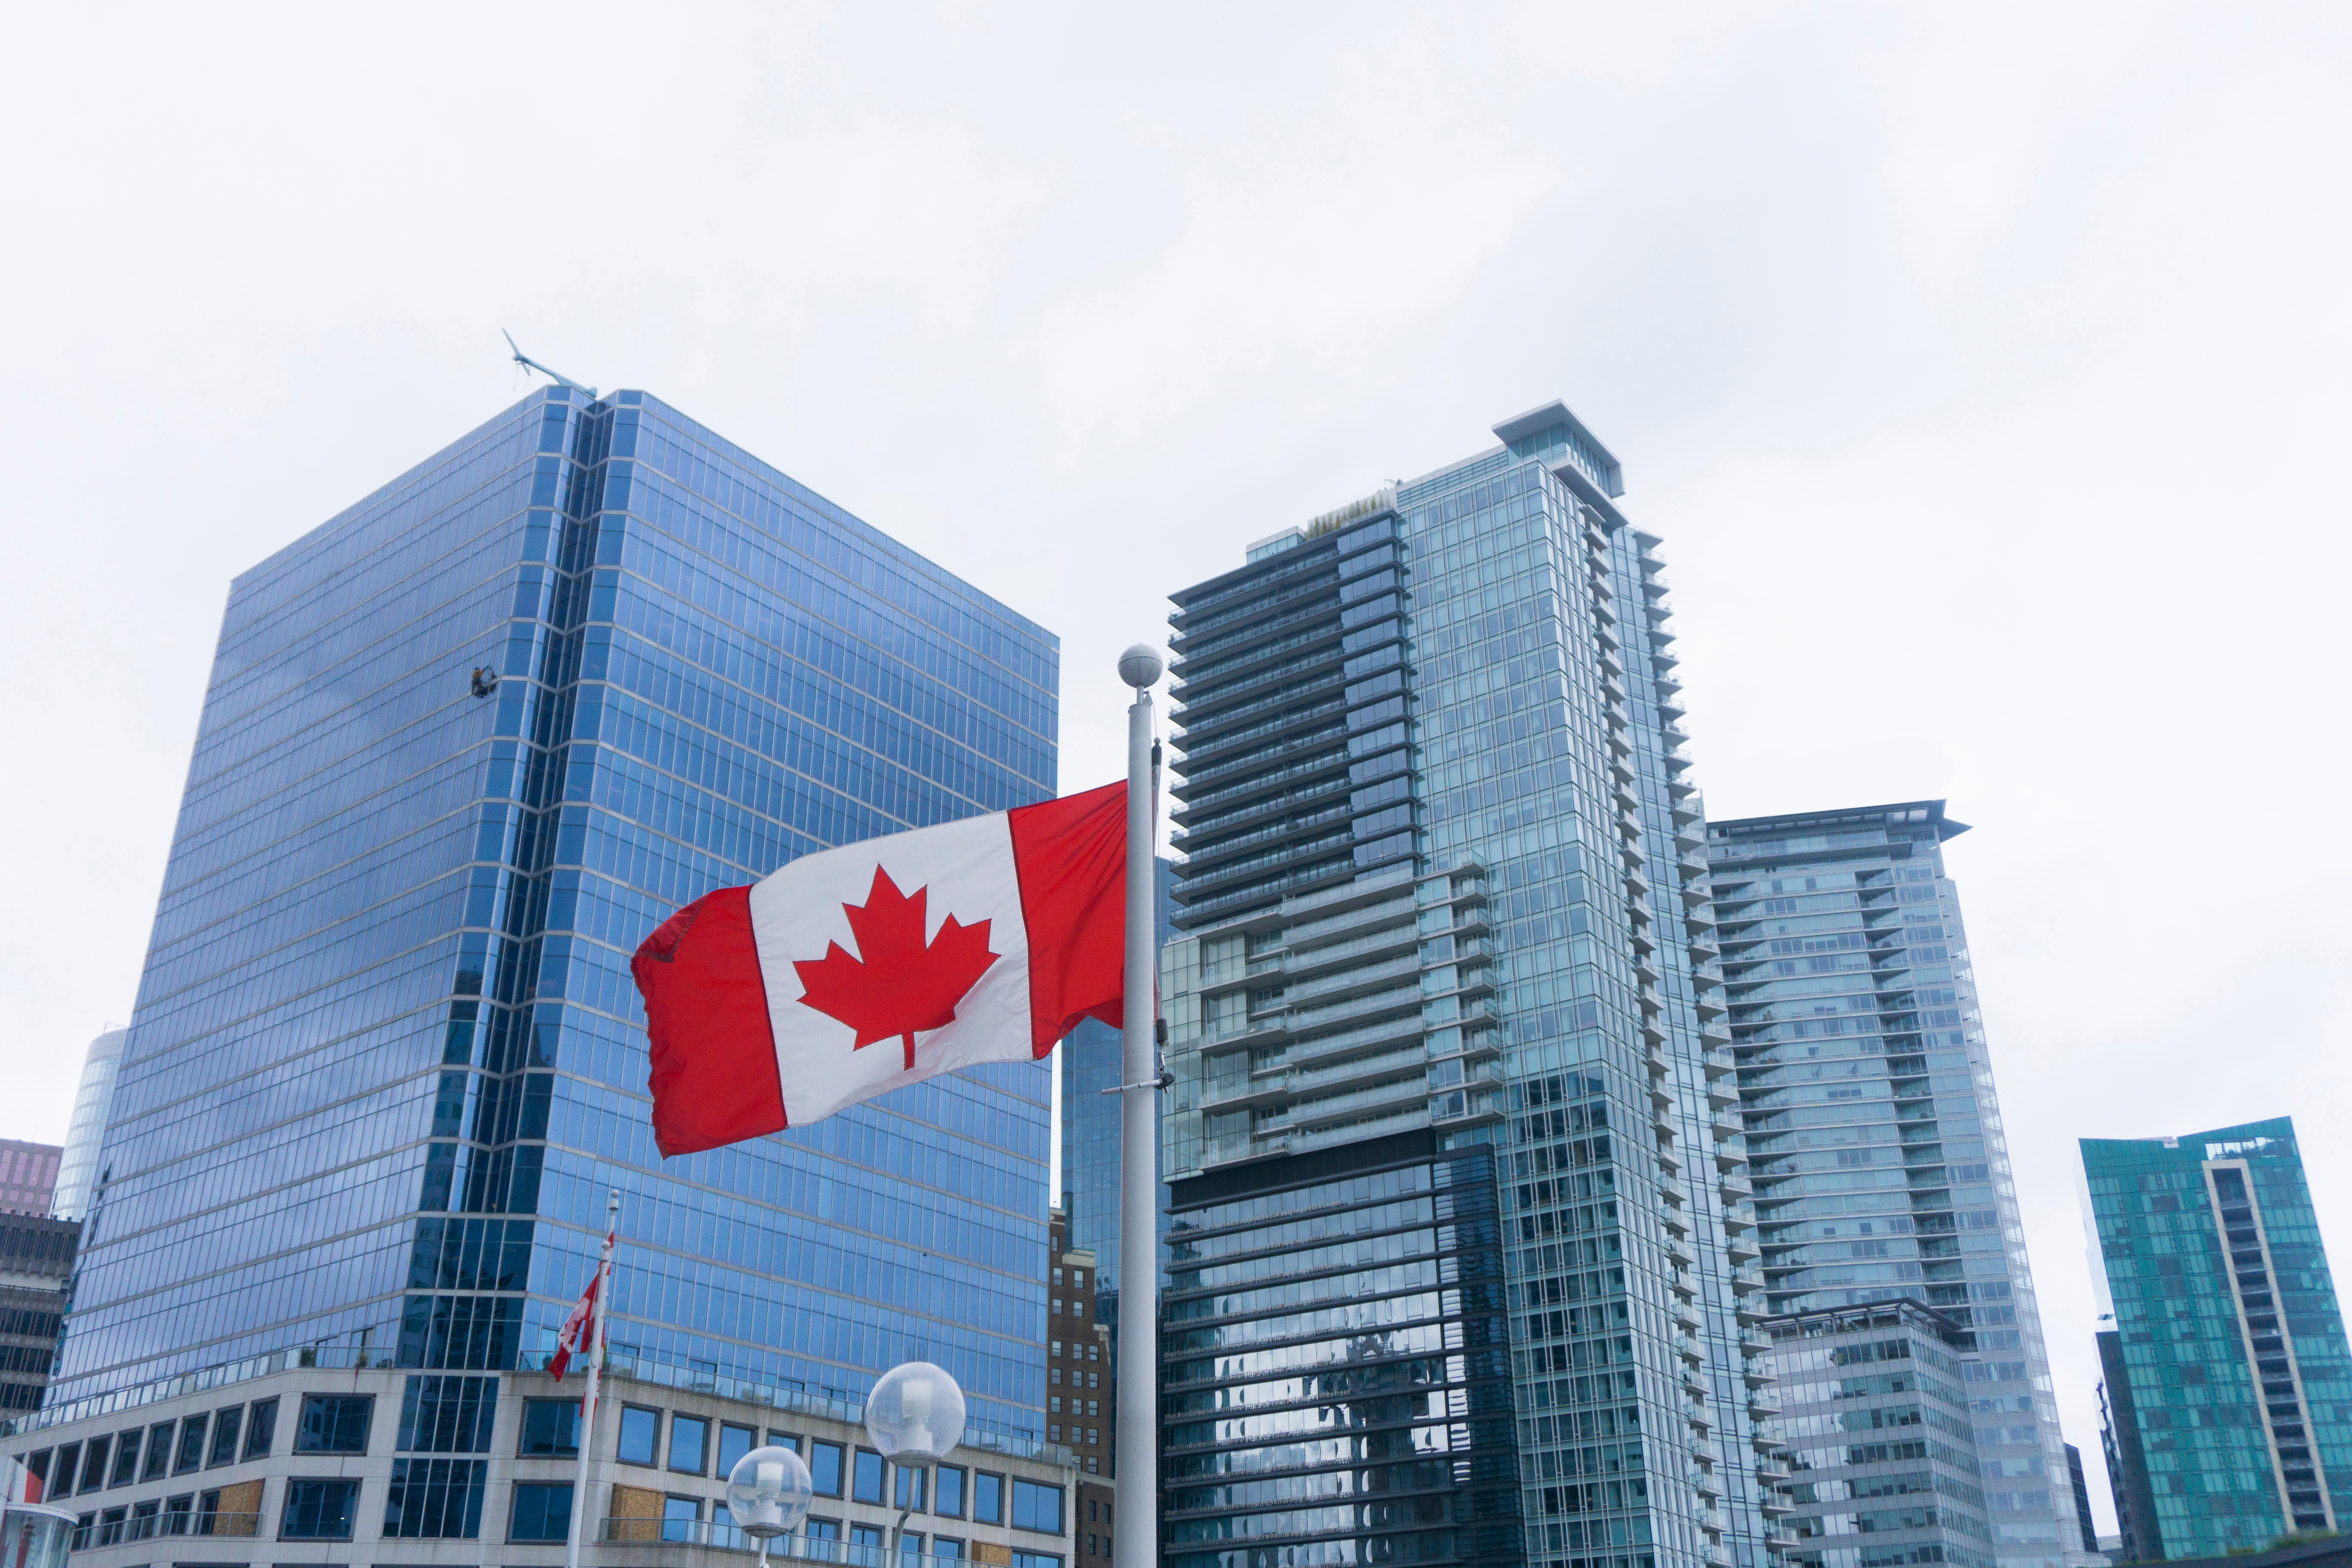 The Canadian flag against the backdrop of offices symbolizes Canadian citizenship by investment